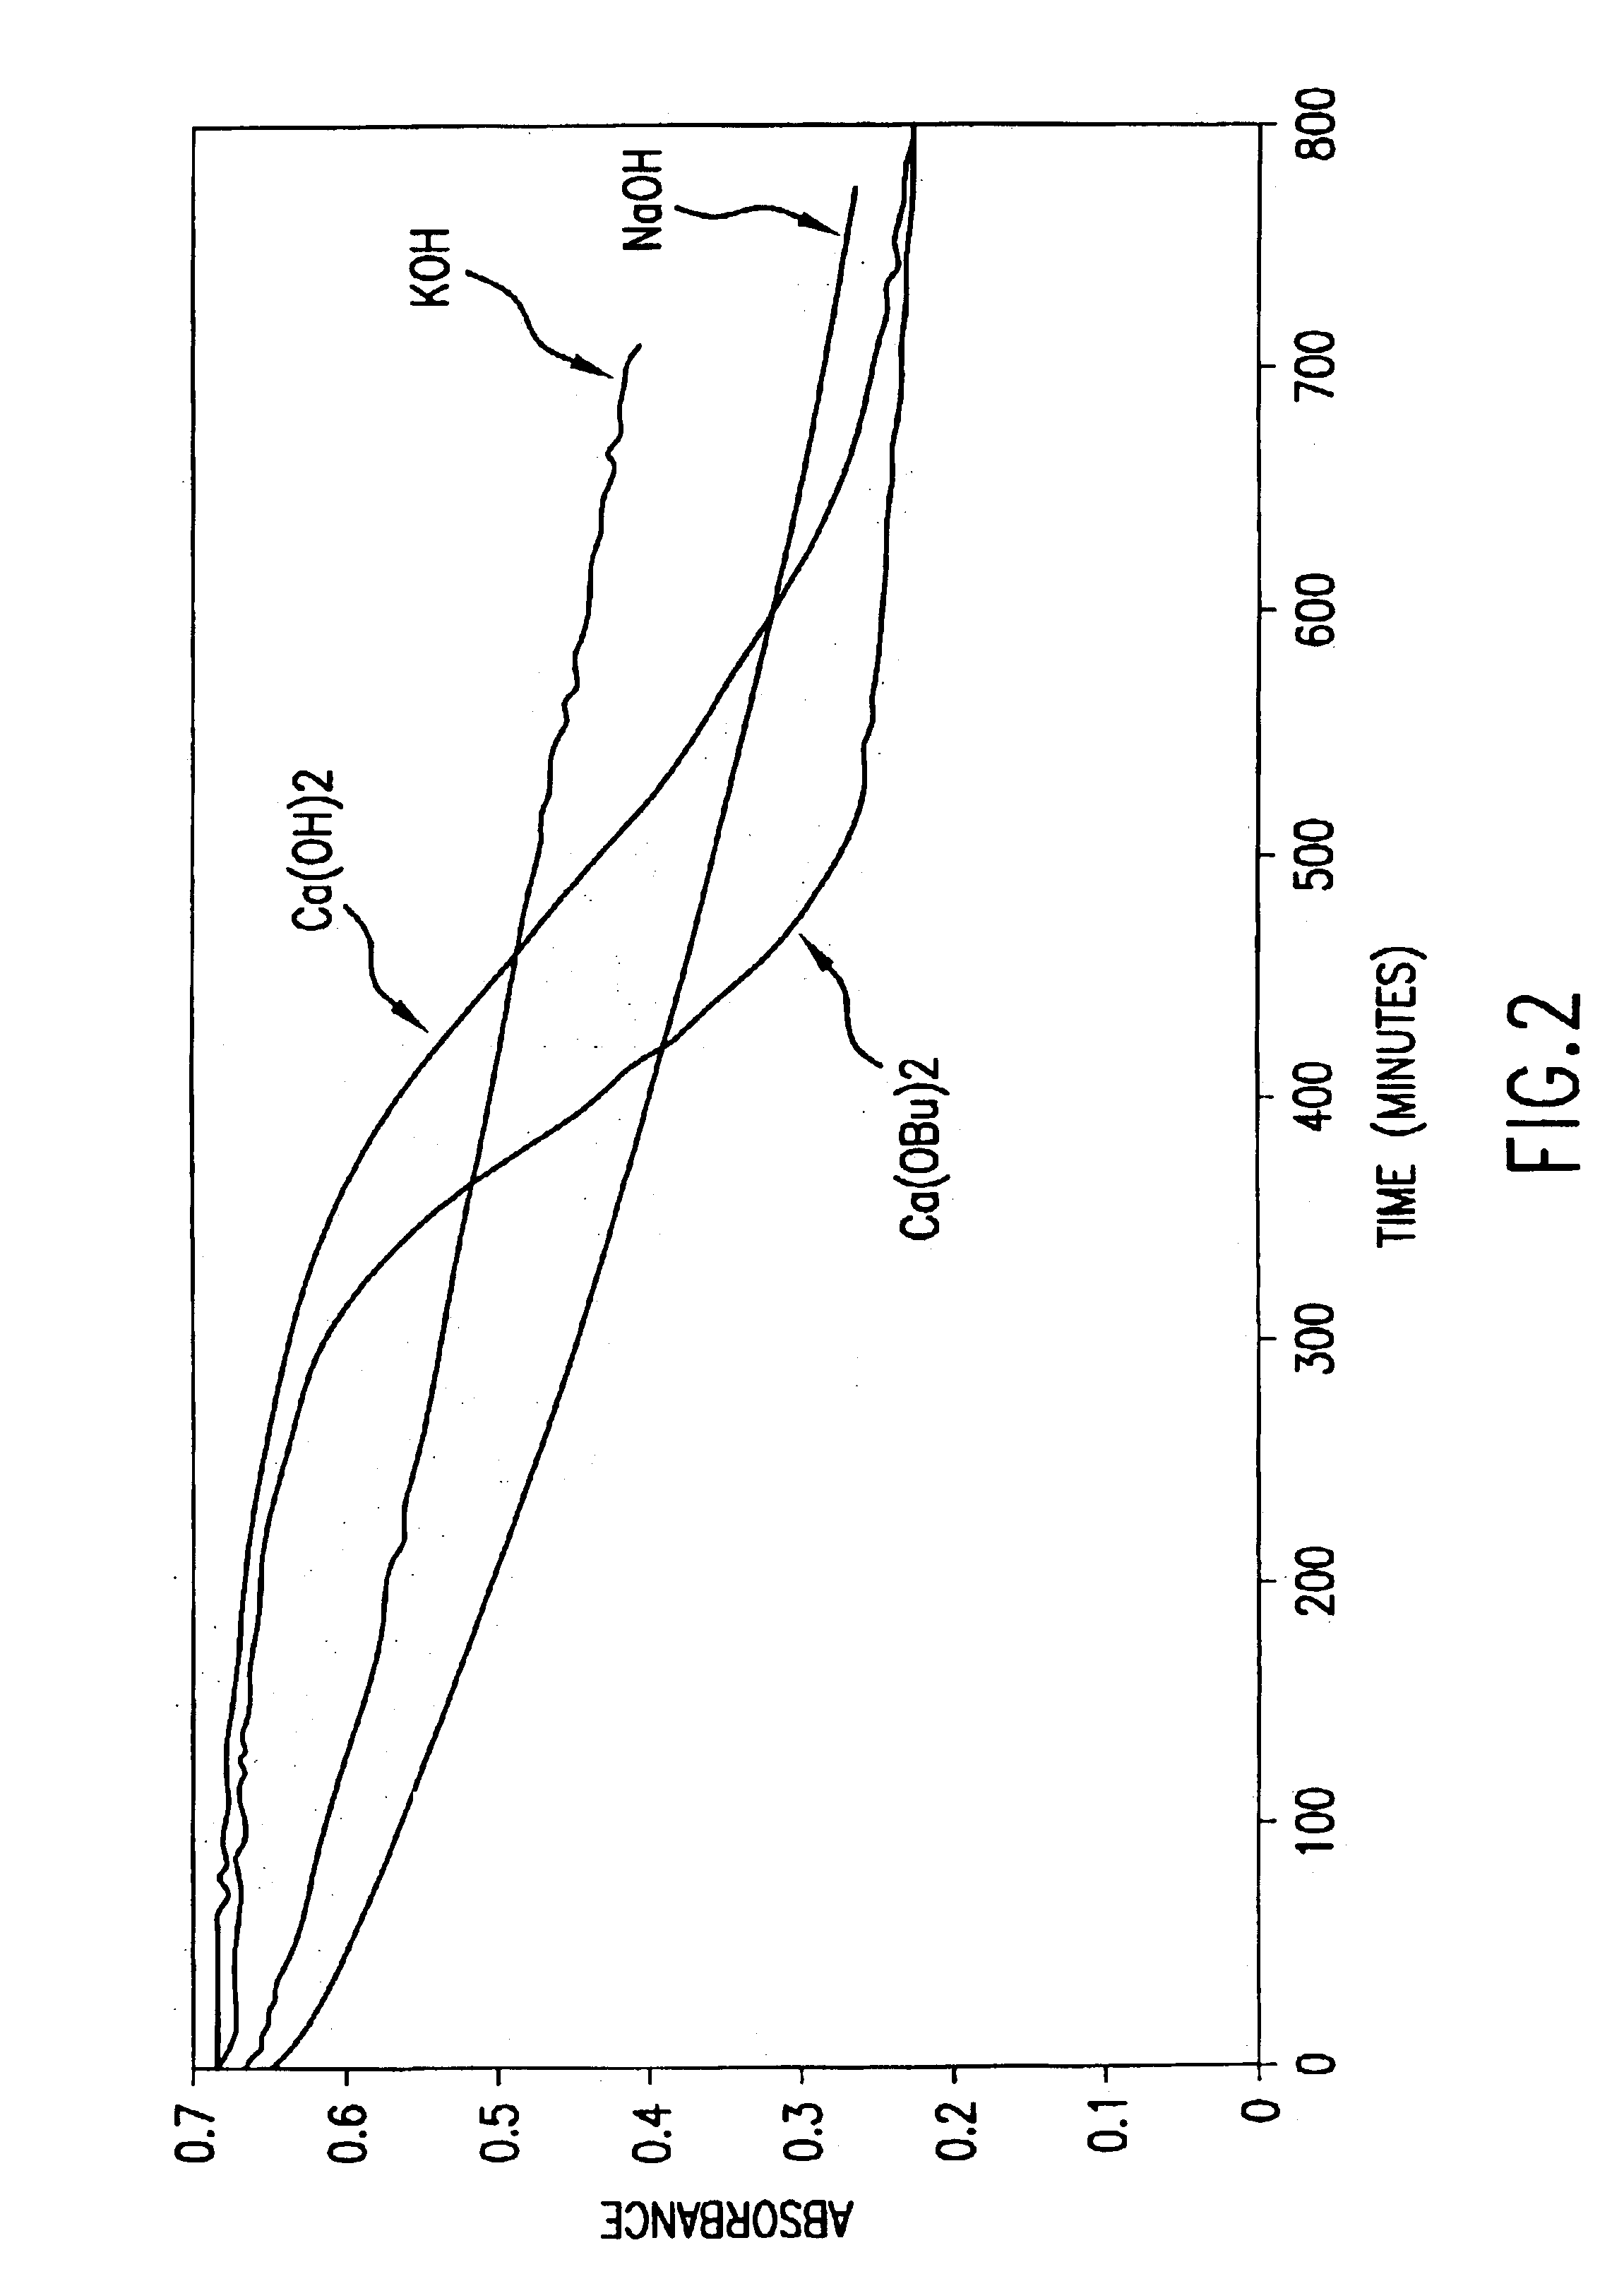 Carbohydrate esters and polyol esters as plasticizers for polymers, compositions and articles including such plasticizers and methods of using the same